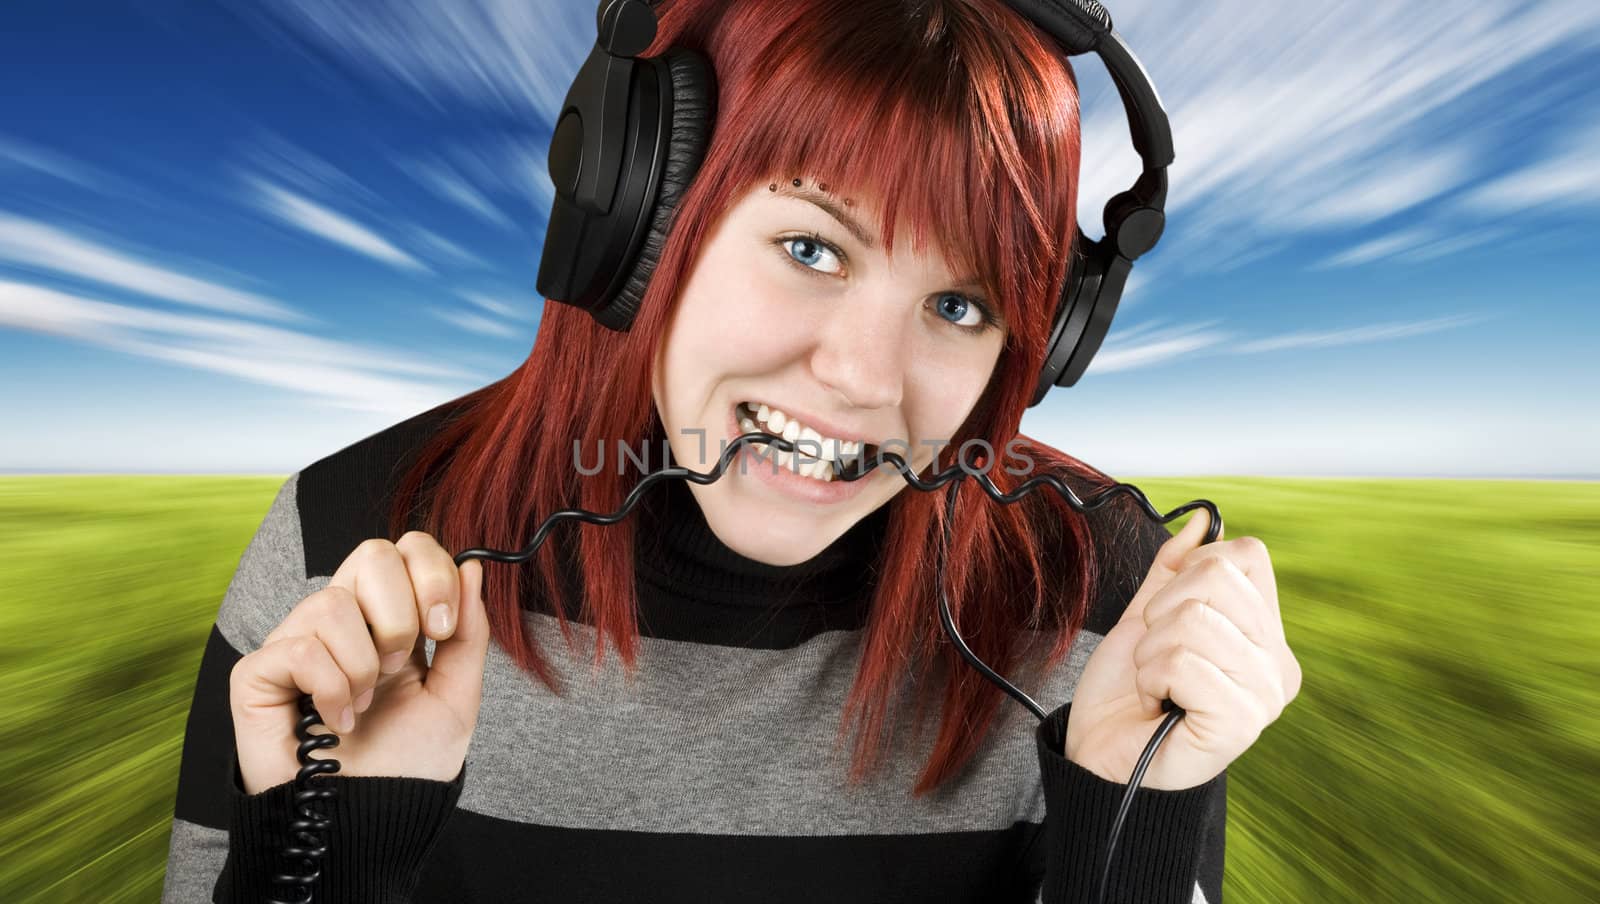 Cute girl with red hair biting the cord of her headphones while listening to music.

Studio shot.